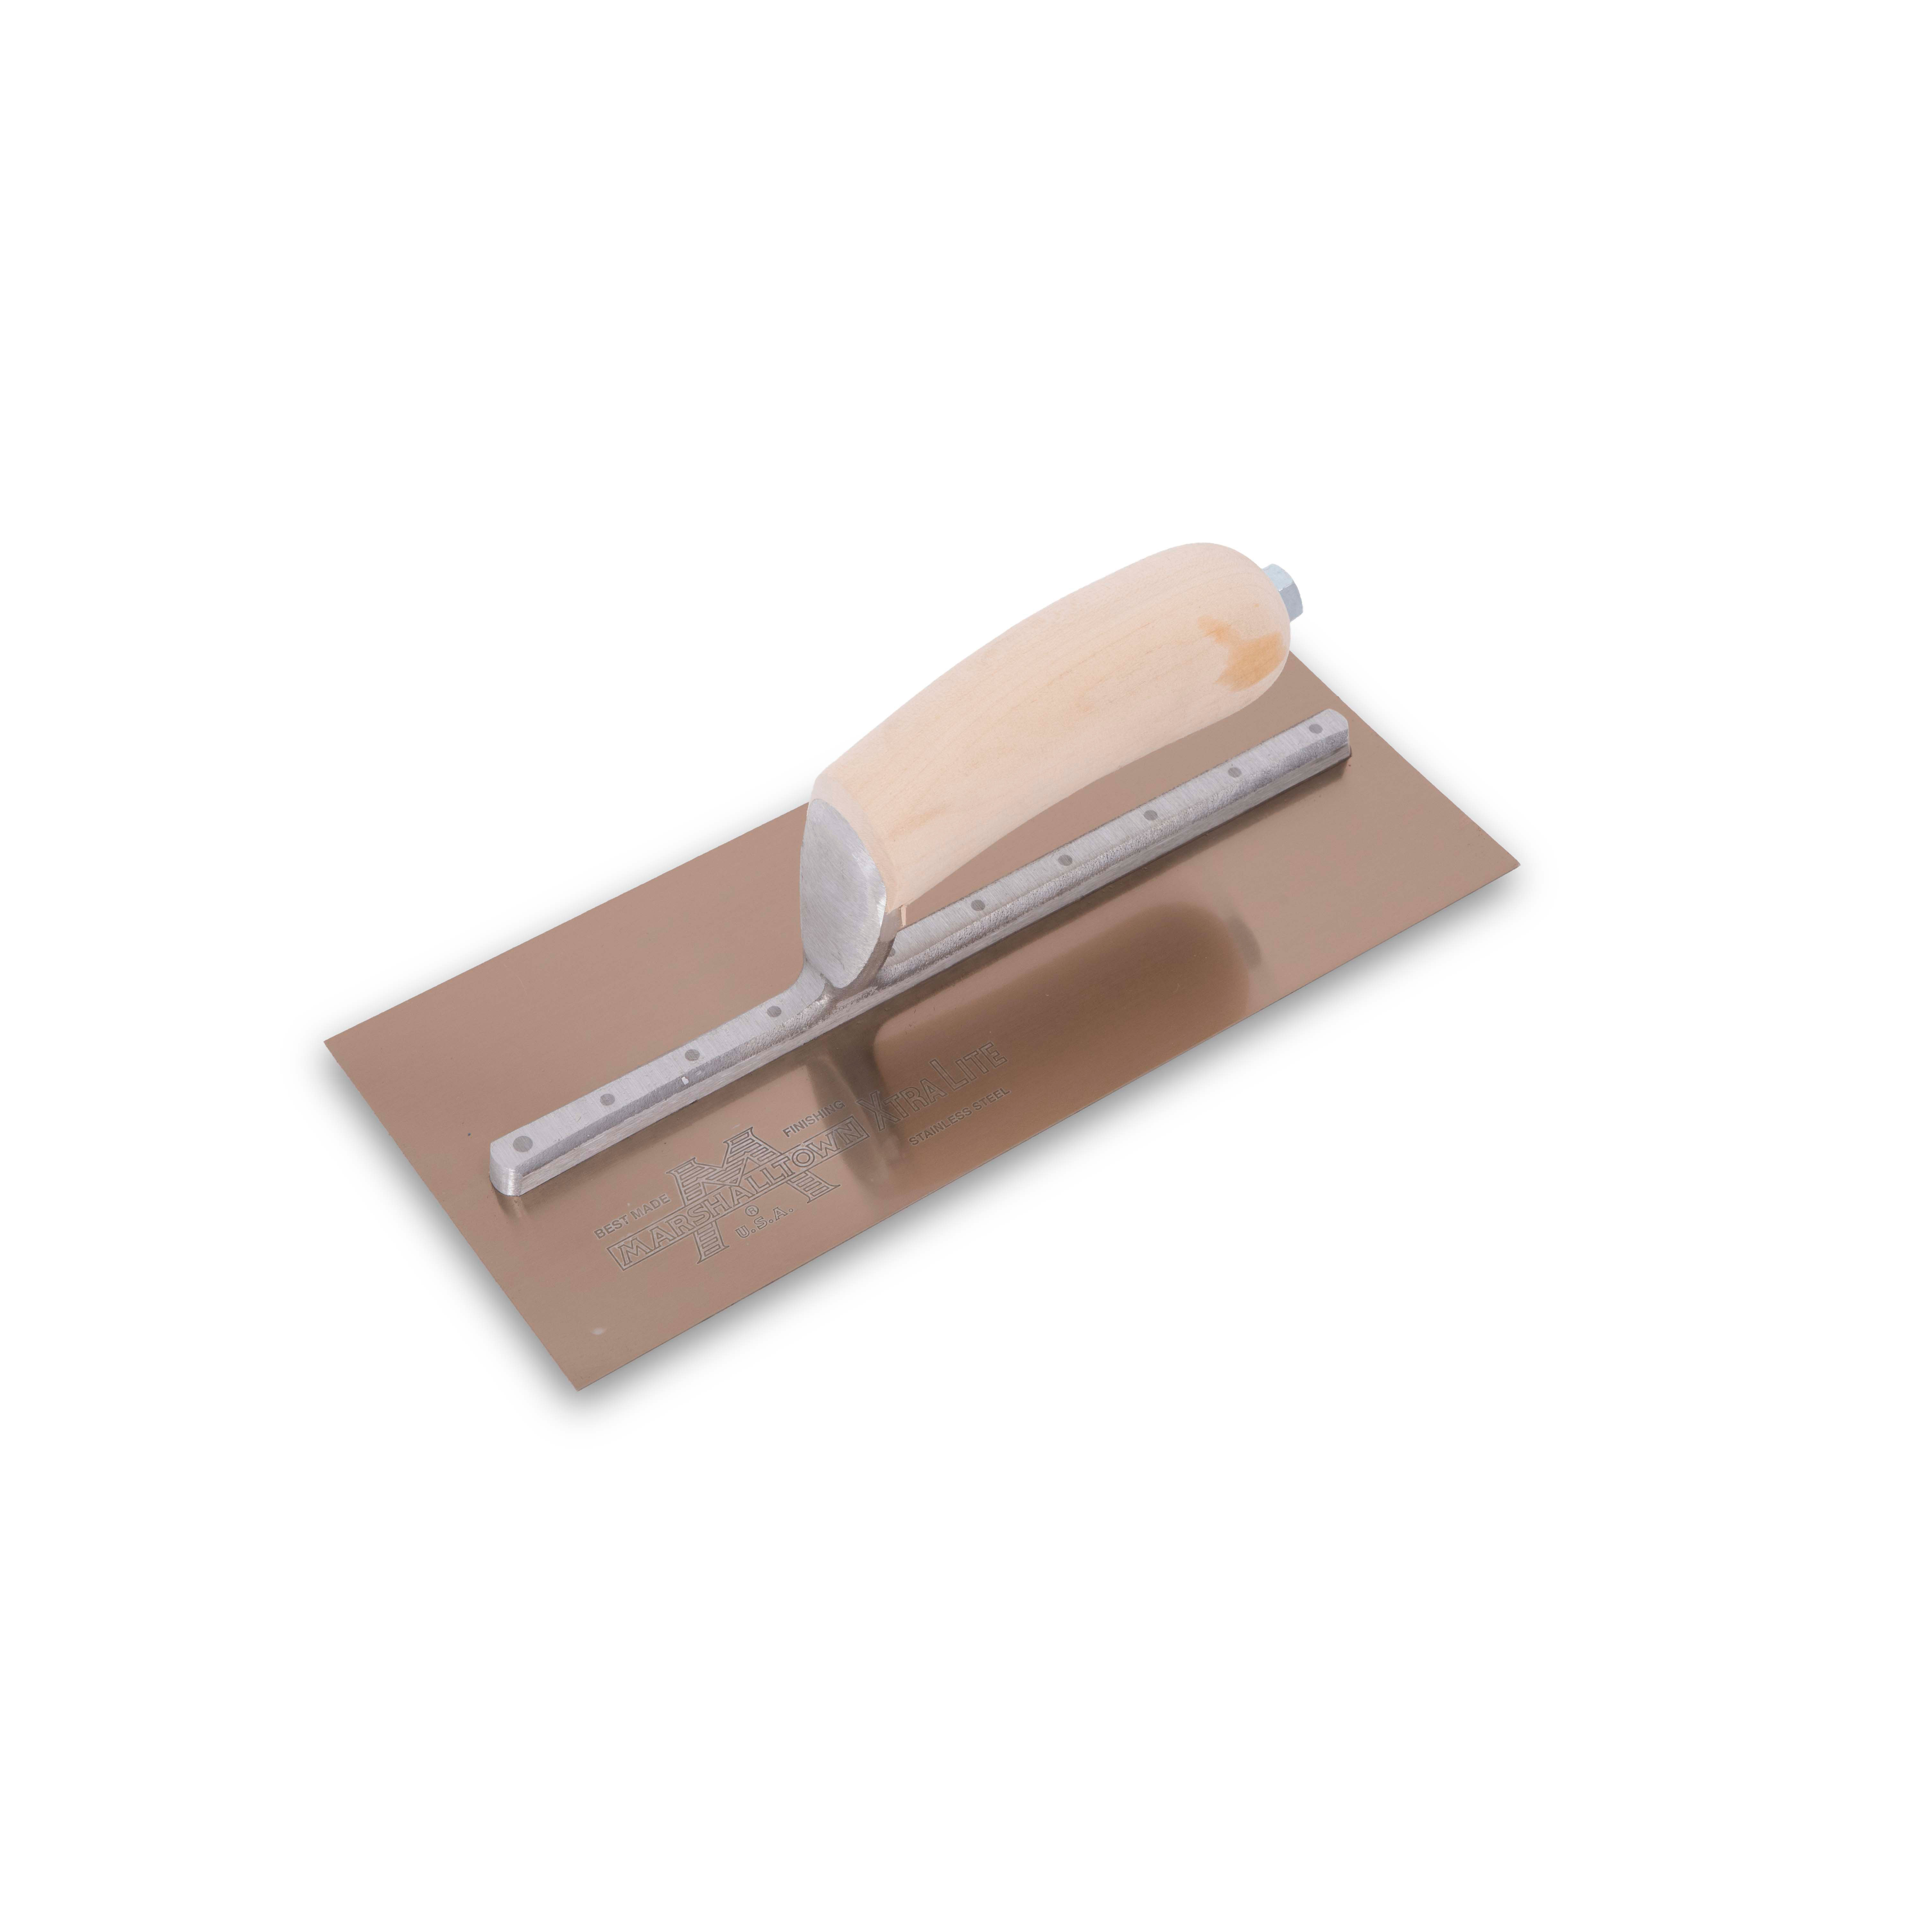 Marshalltown MXS91GS 10-1/2in x 4-1/2in Golden Stainless Finishing Trowel with Curved Wood Handle MXS91GS